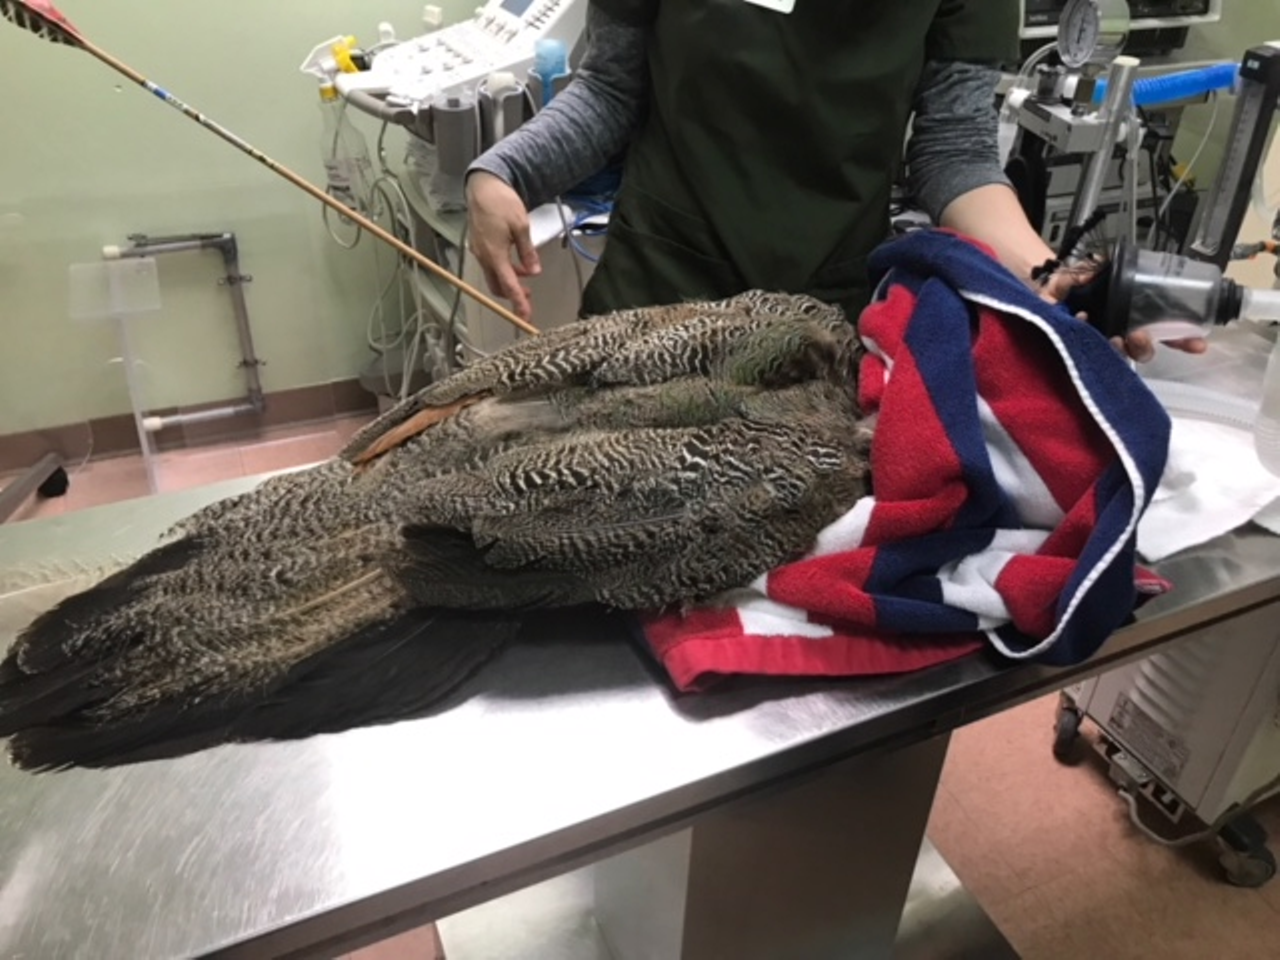 Dr. Murphy at the Animal and Bird Hospital of Clearwater attended to the injured bird.